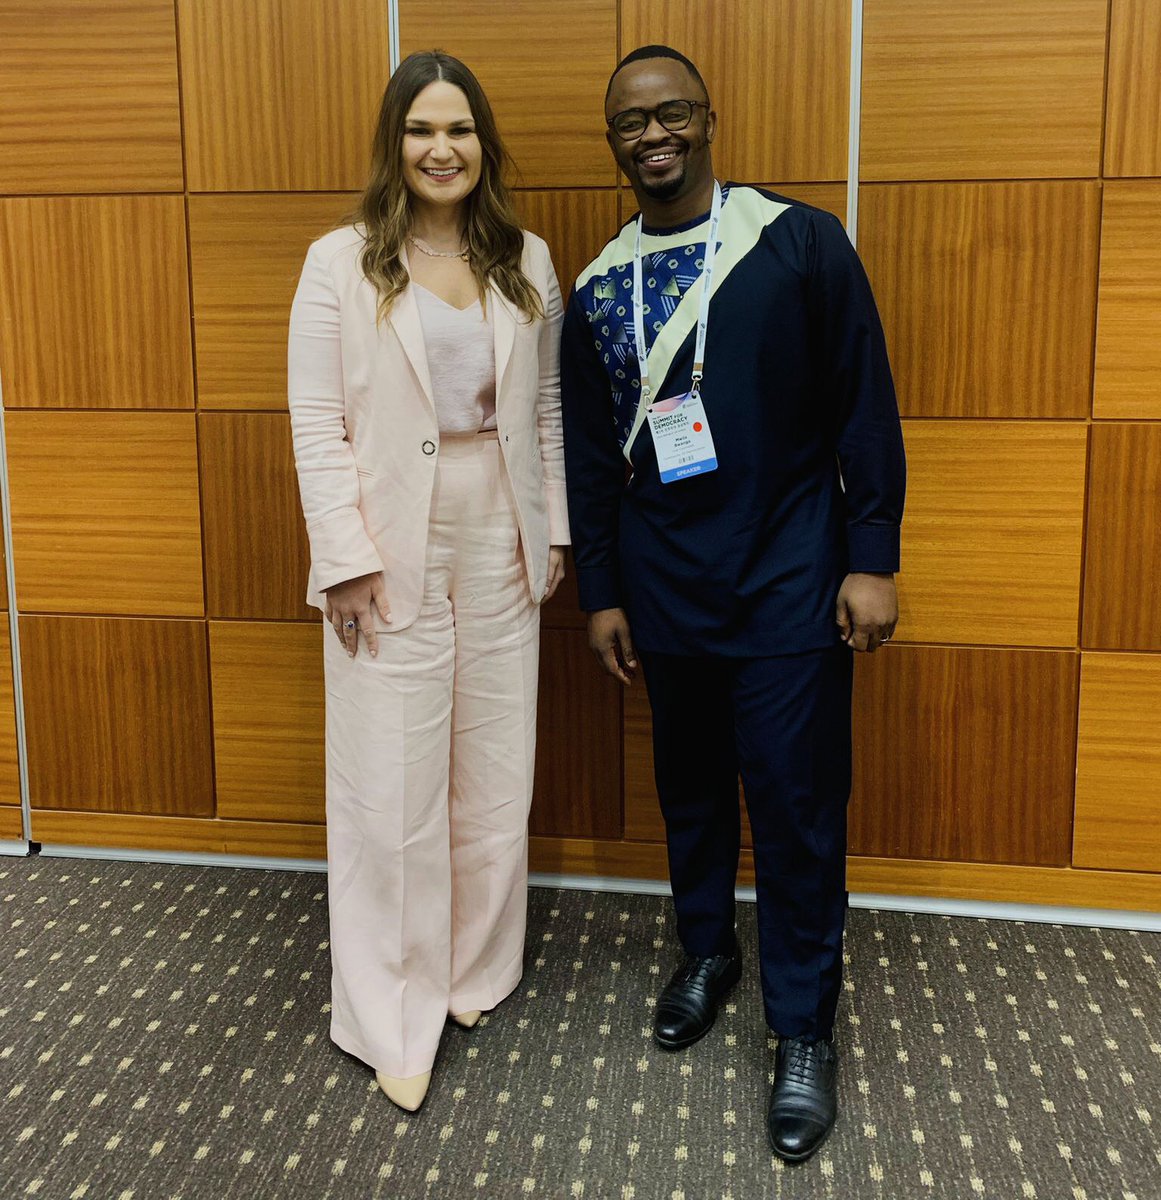 While on the sideline of the Summit for Democracy with special facilitation from the @CommunityofDem - had the time to engage with the Special Youth Envoy for the United States Abby Finkenauer @USGlobalYouth on matters of youth diplomacy in strengthening democracy.